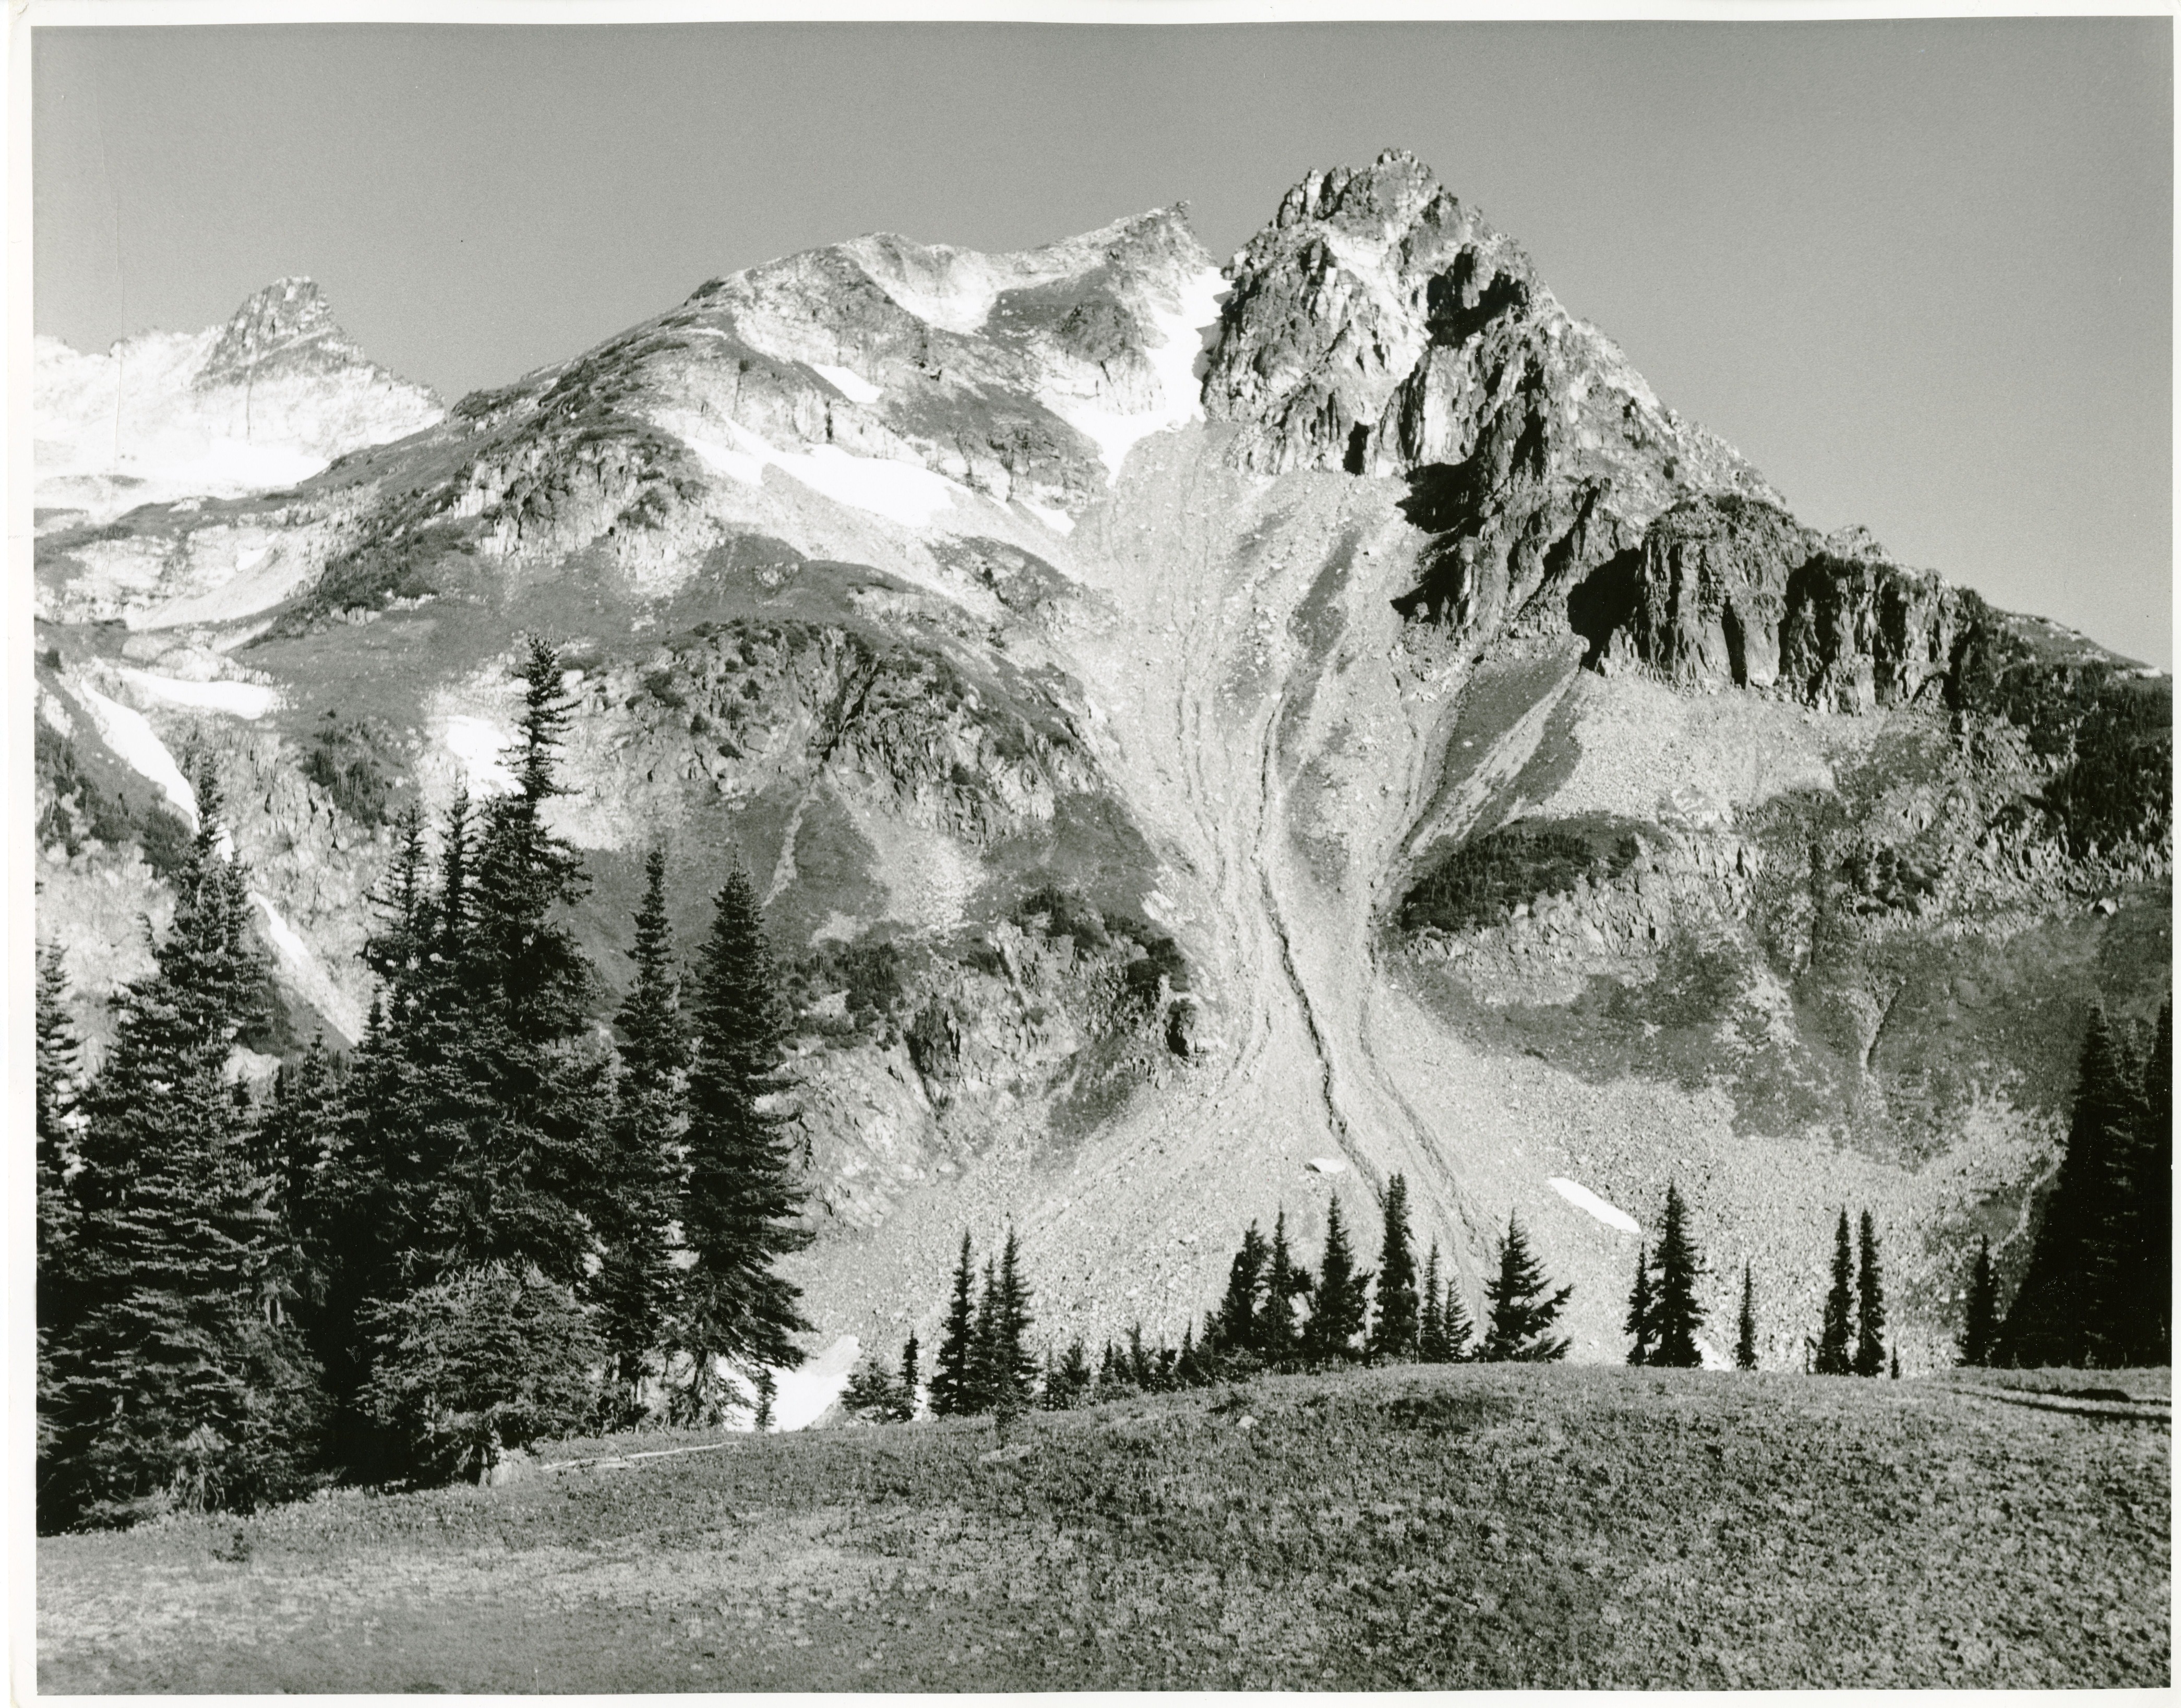 A rocky mountain in front of a grassy slope. Evidence of heavy erosion on the mountain. Coniferous trees between the slope and the mountain. (North Cascades NPS Complex Museum Collection, Assembled Collections, Series V: NPS North Cascades Survey Photographs)